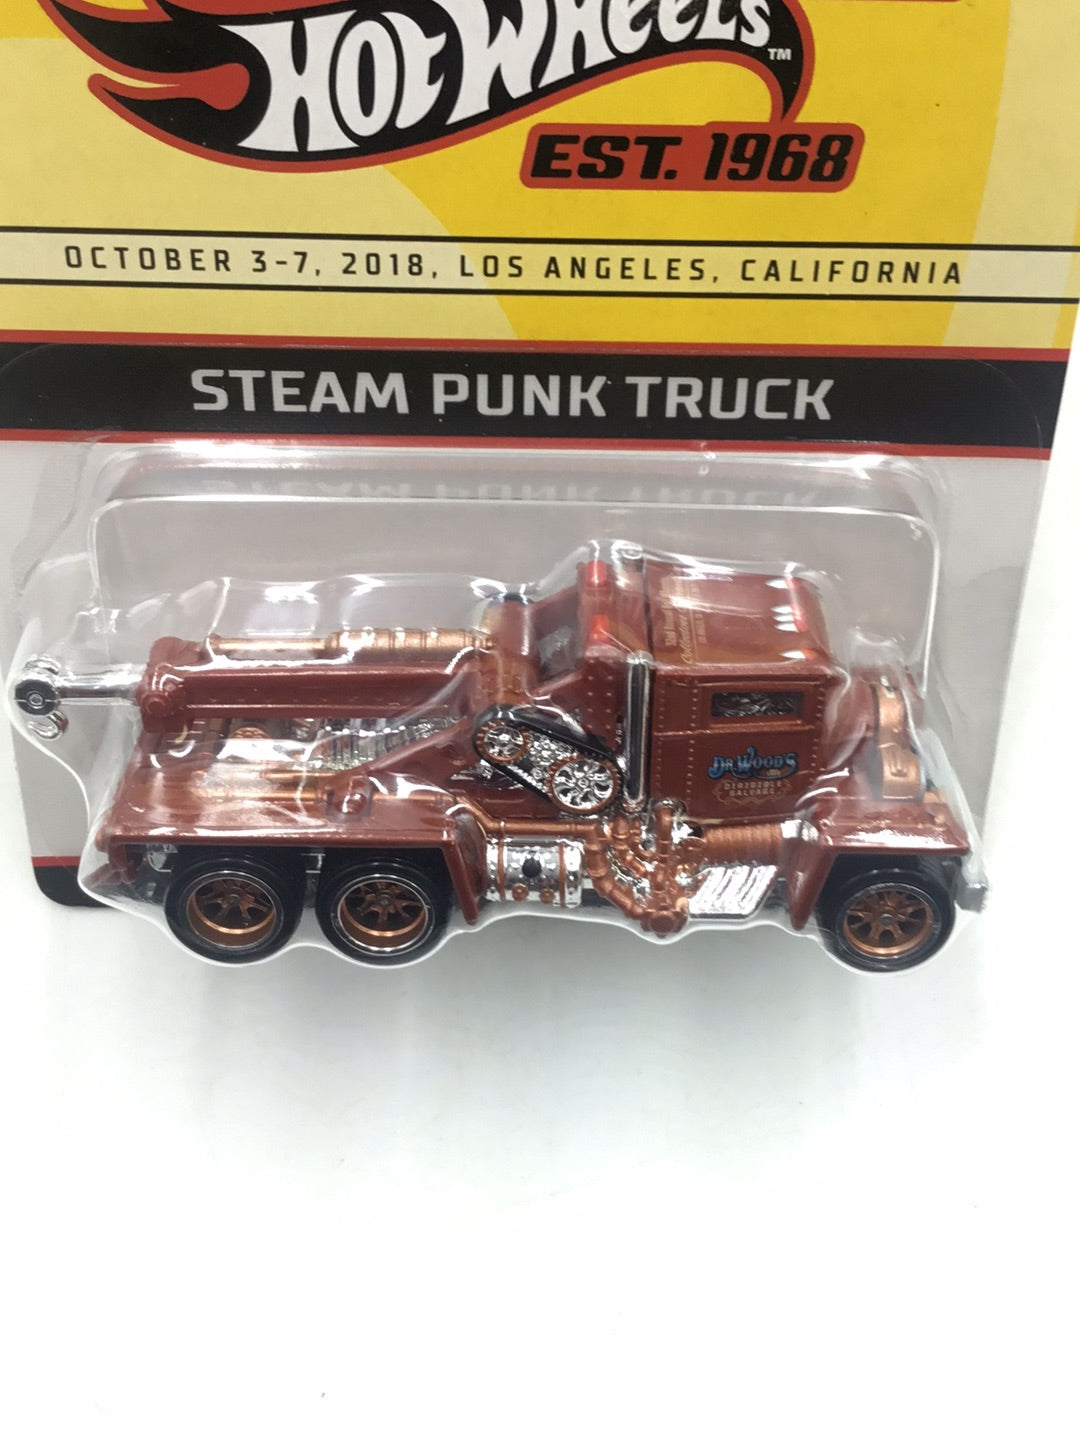 Hot wheels 32nd annual collectors Convention Steam Punk Truck 1700/4000 VHTF with protector